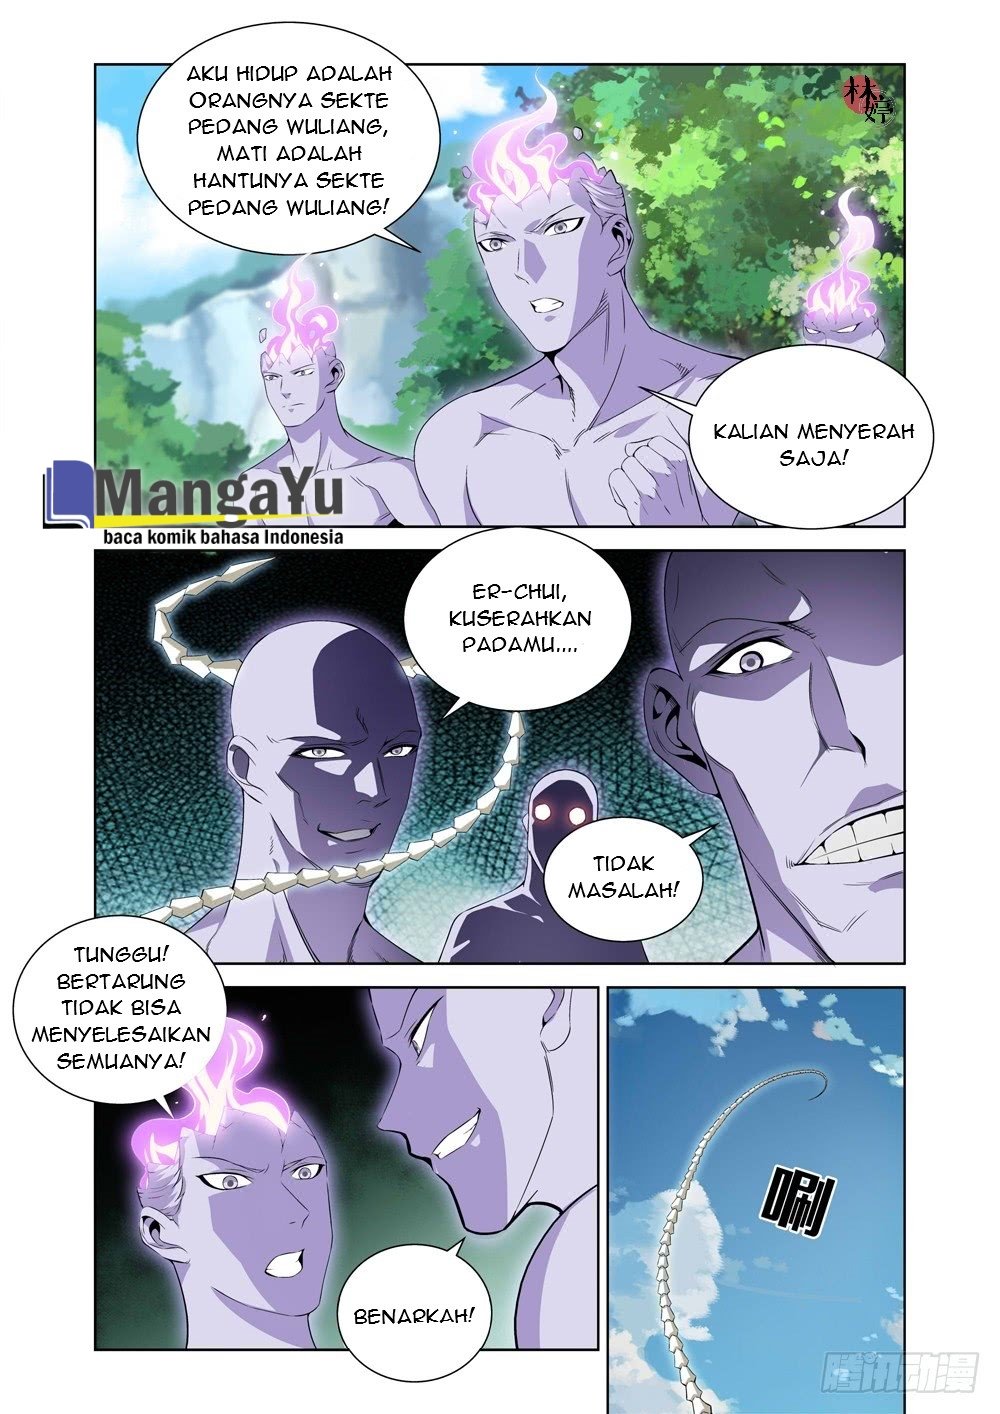 Strongest System Yan Luo Chapter 06